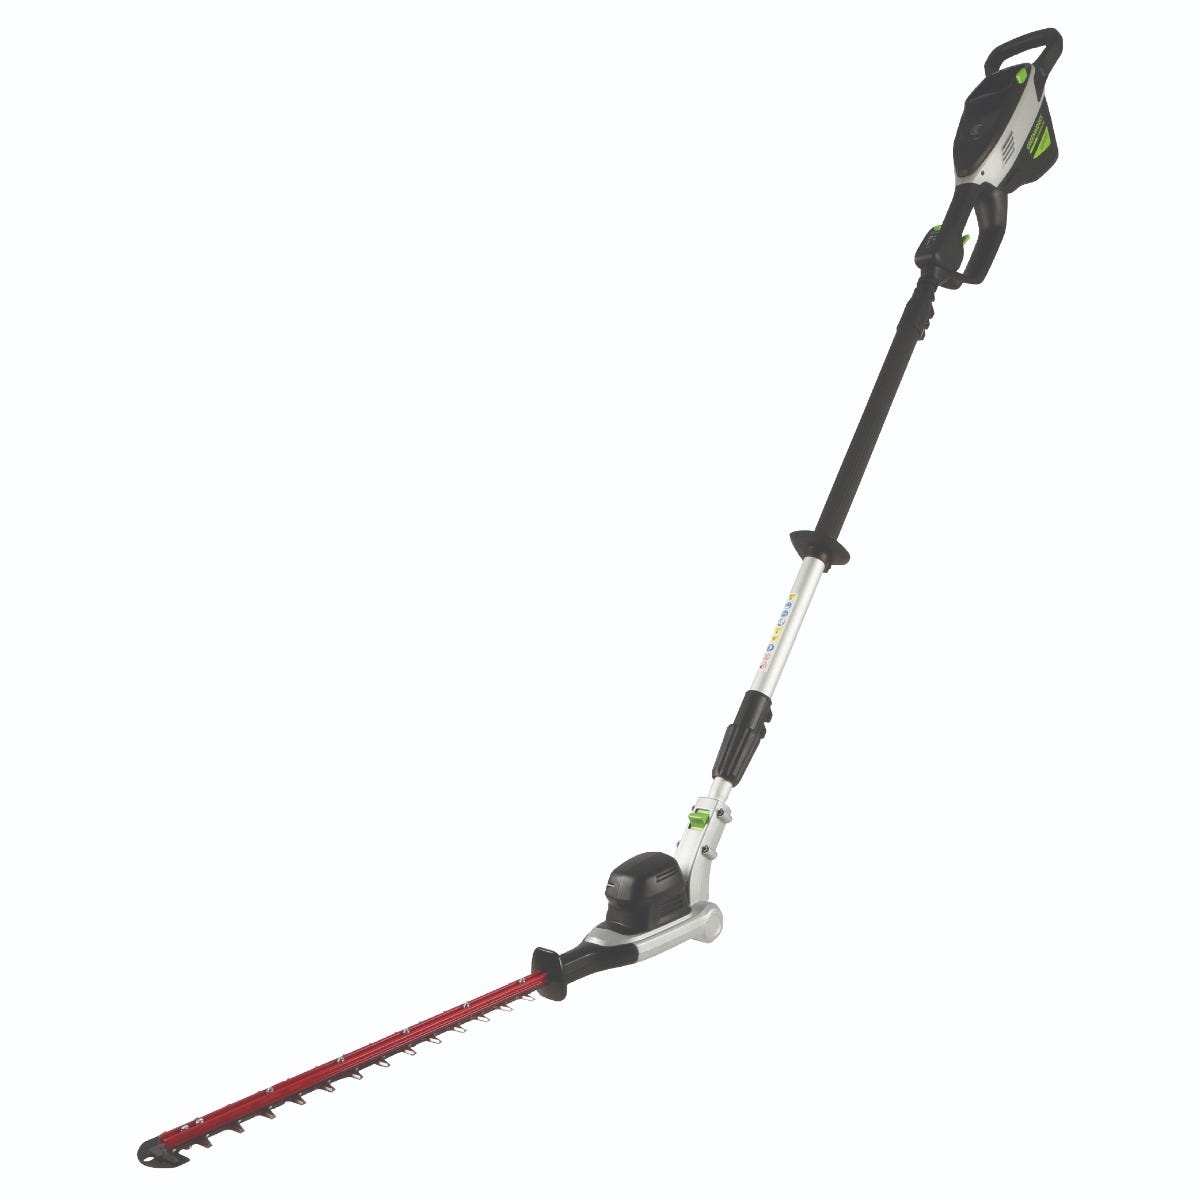 82PH20T 82-Volt Telescoping Pole Hedge Trimmer (Tool Only)